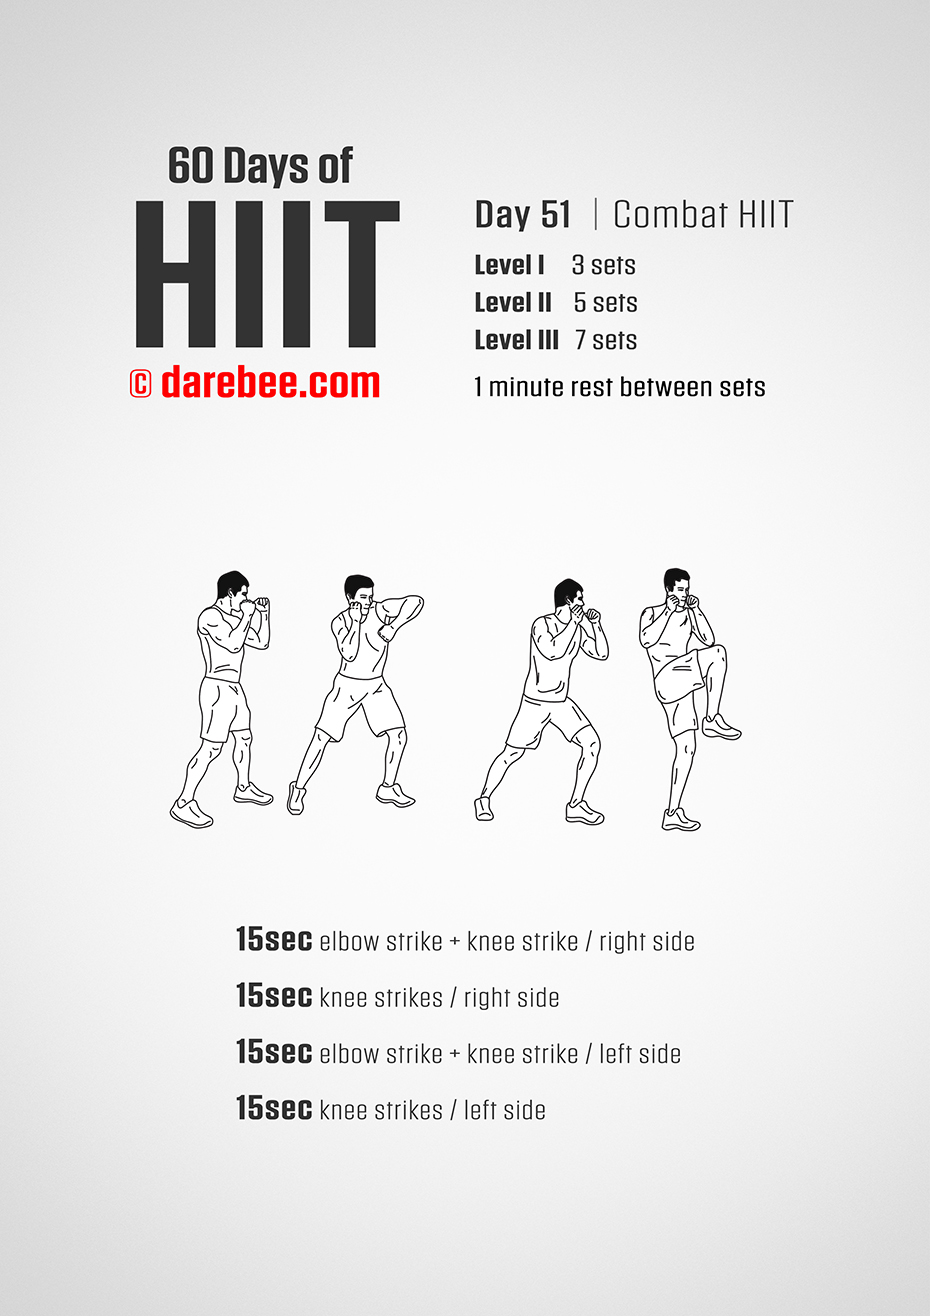 60 Days of HIIT by DAREBEE